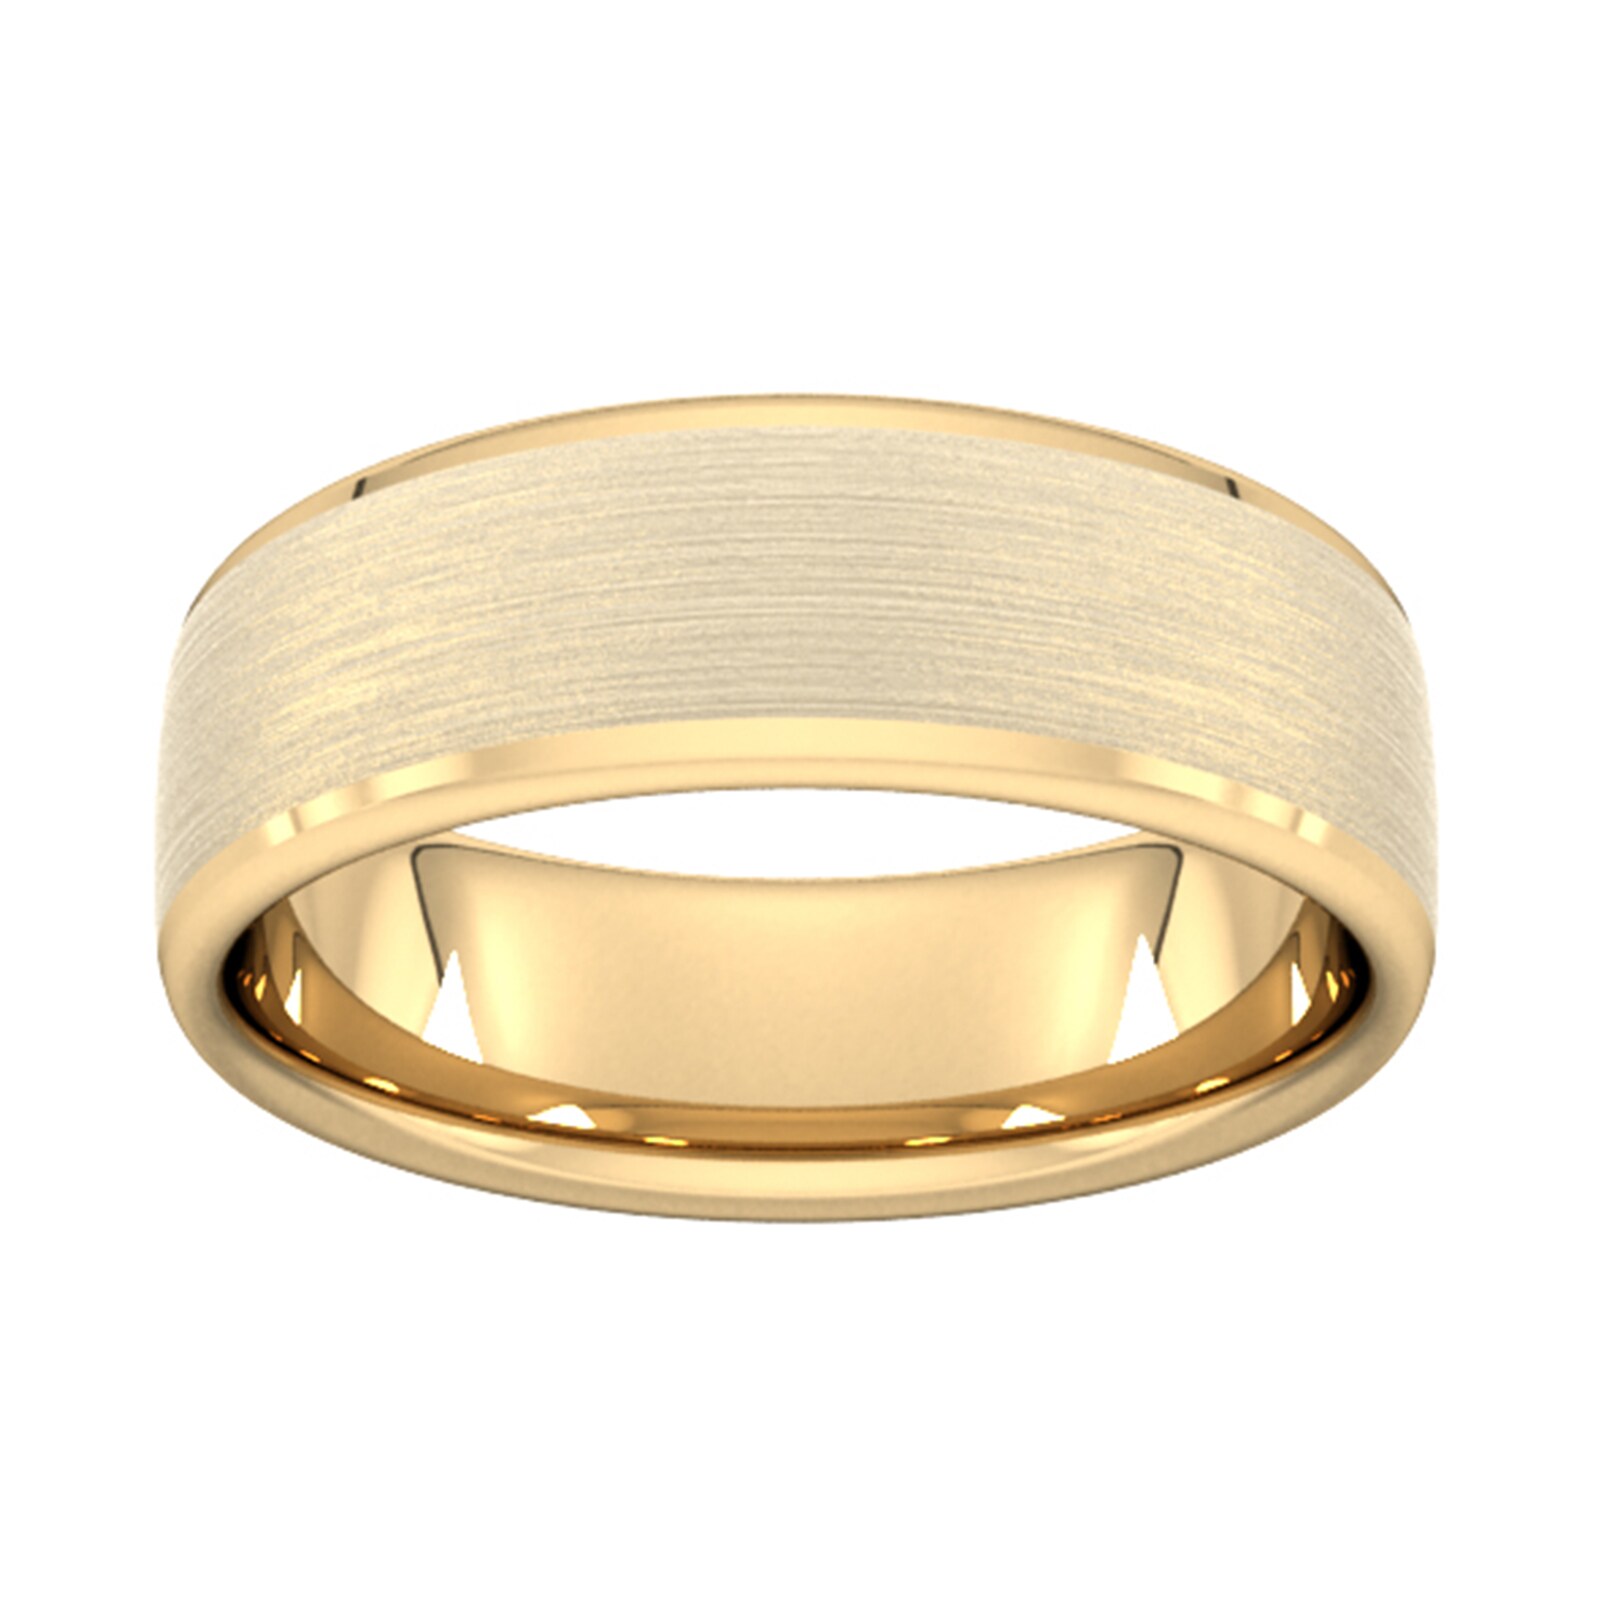 7mm D Shape Heavy Polished Chamfered Edges With Matt Centre Wedding Ring In 9 Carat Yellow Gold - Ring Size O